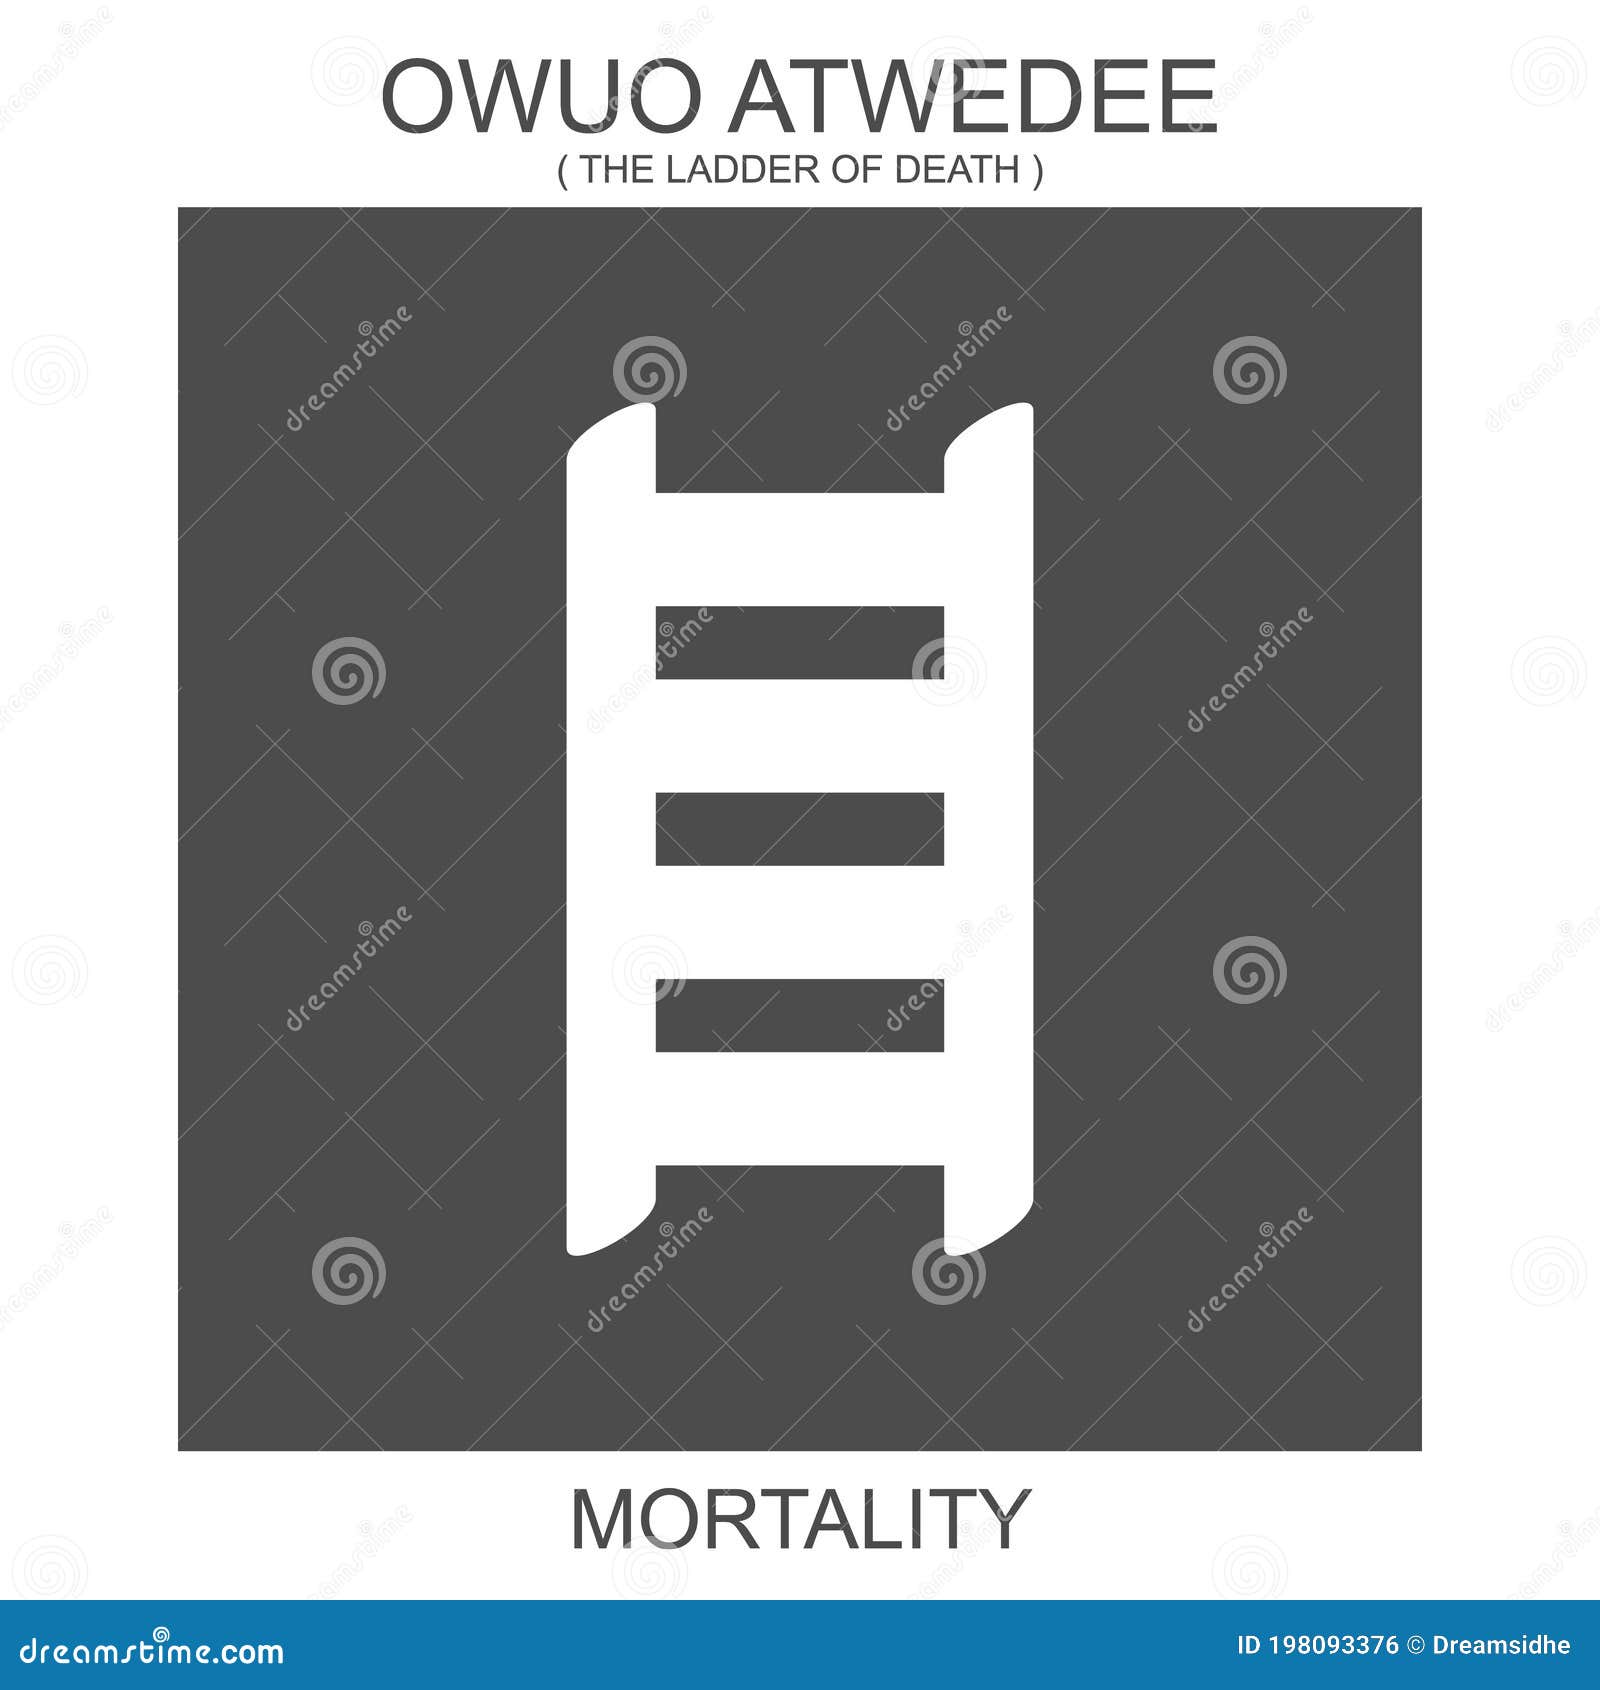 icon with african adinkra  owuo atwedee.  of mortality